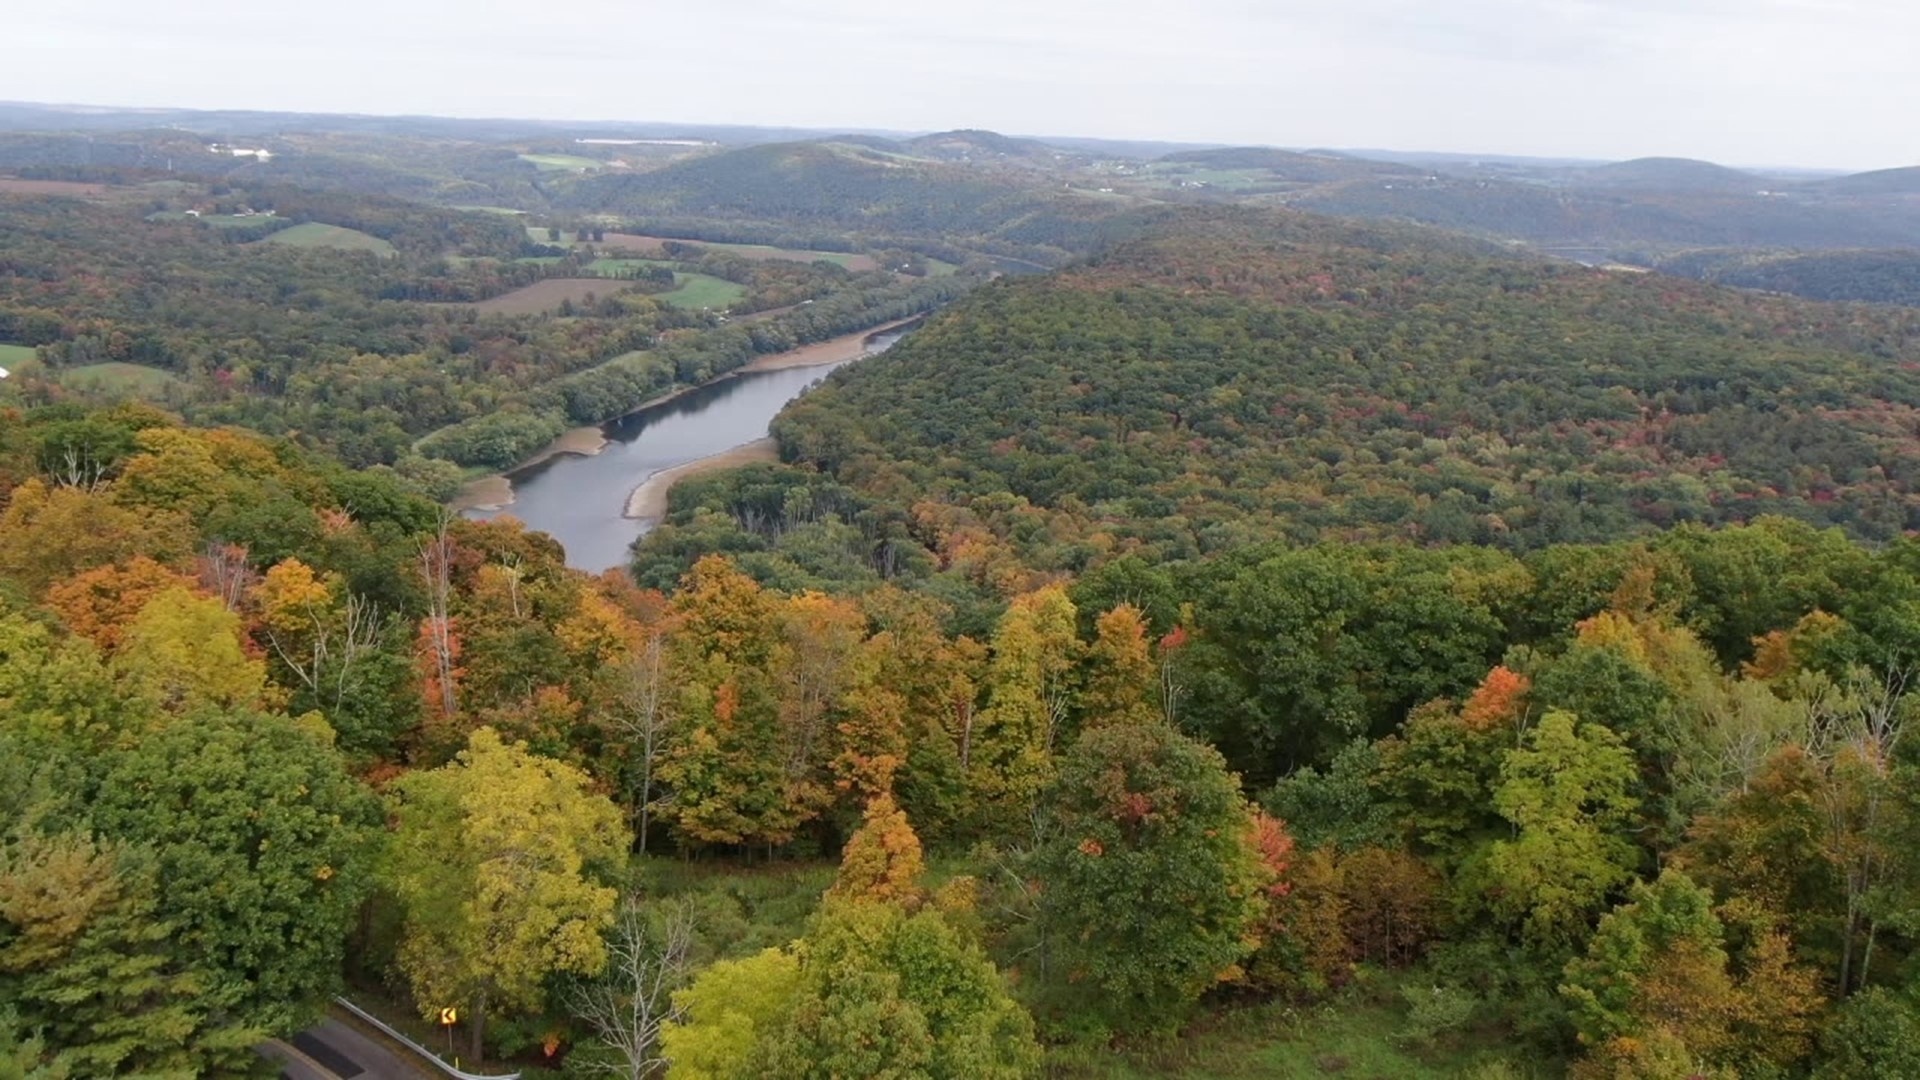 A Skycam 16 view of the fall foliage in Wyoming County's first state park.